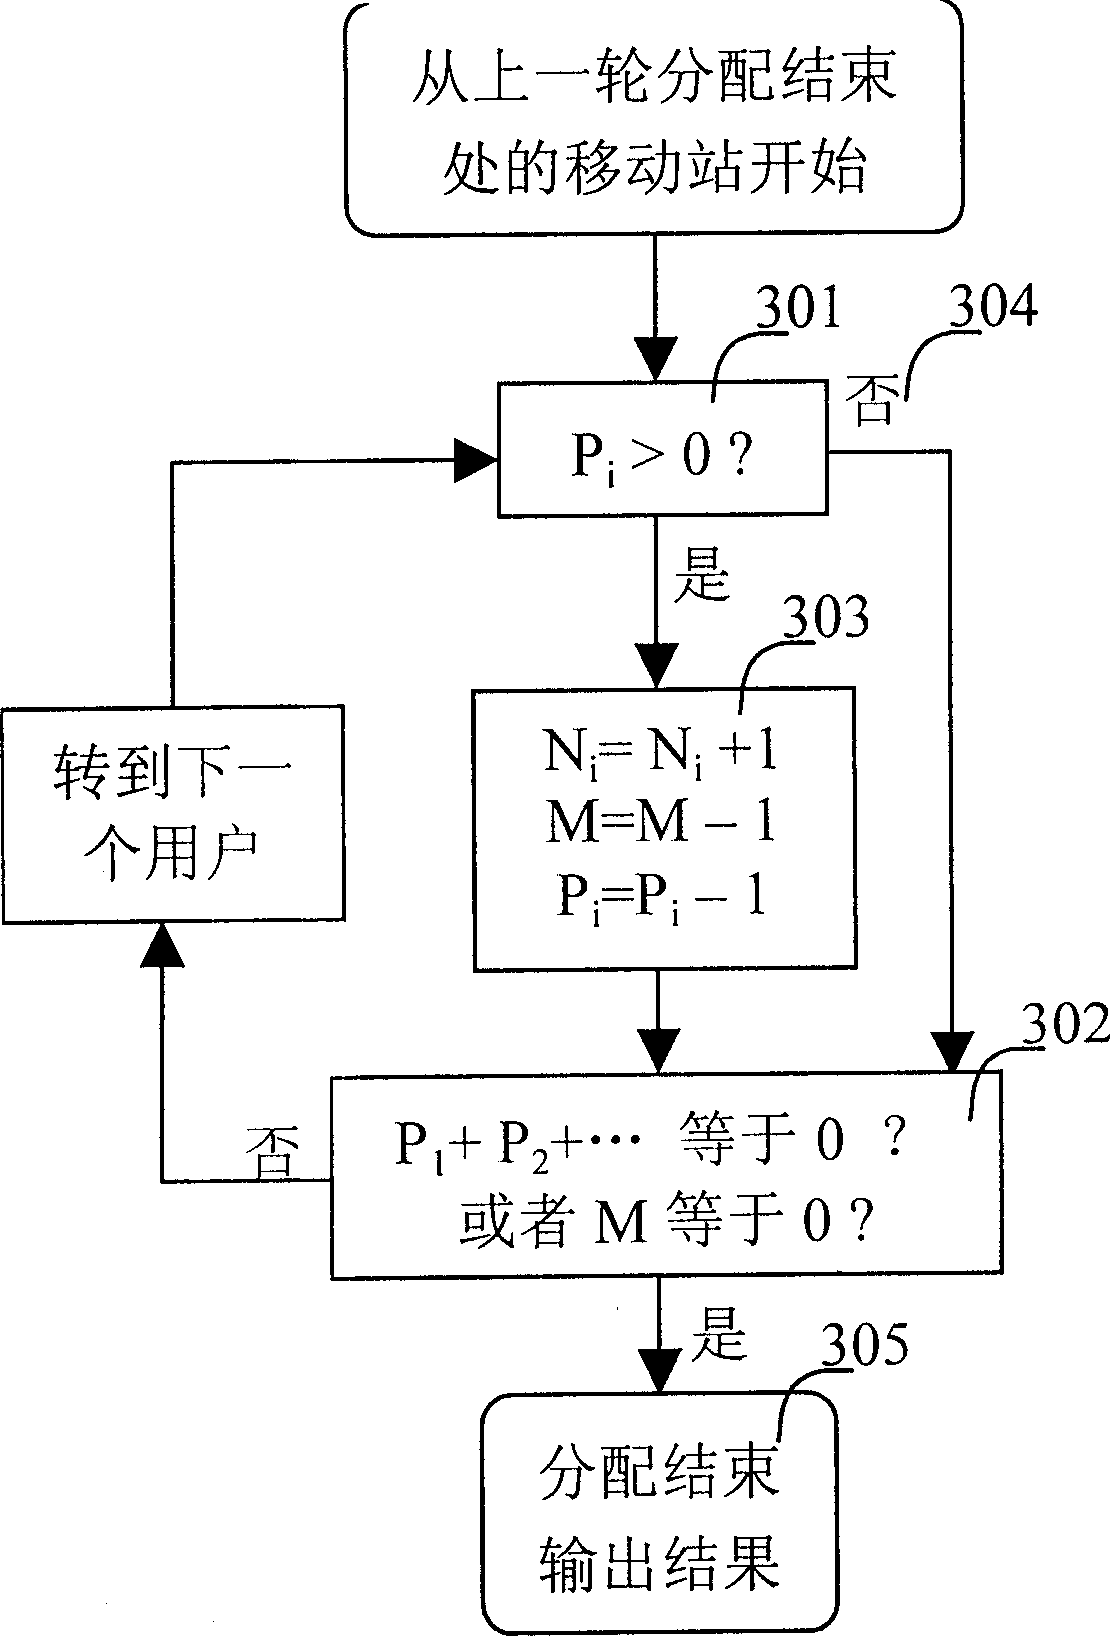 Upstream grouping transmission rate control method for CDMA communication system